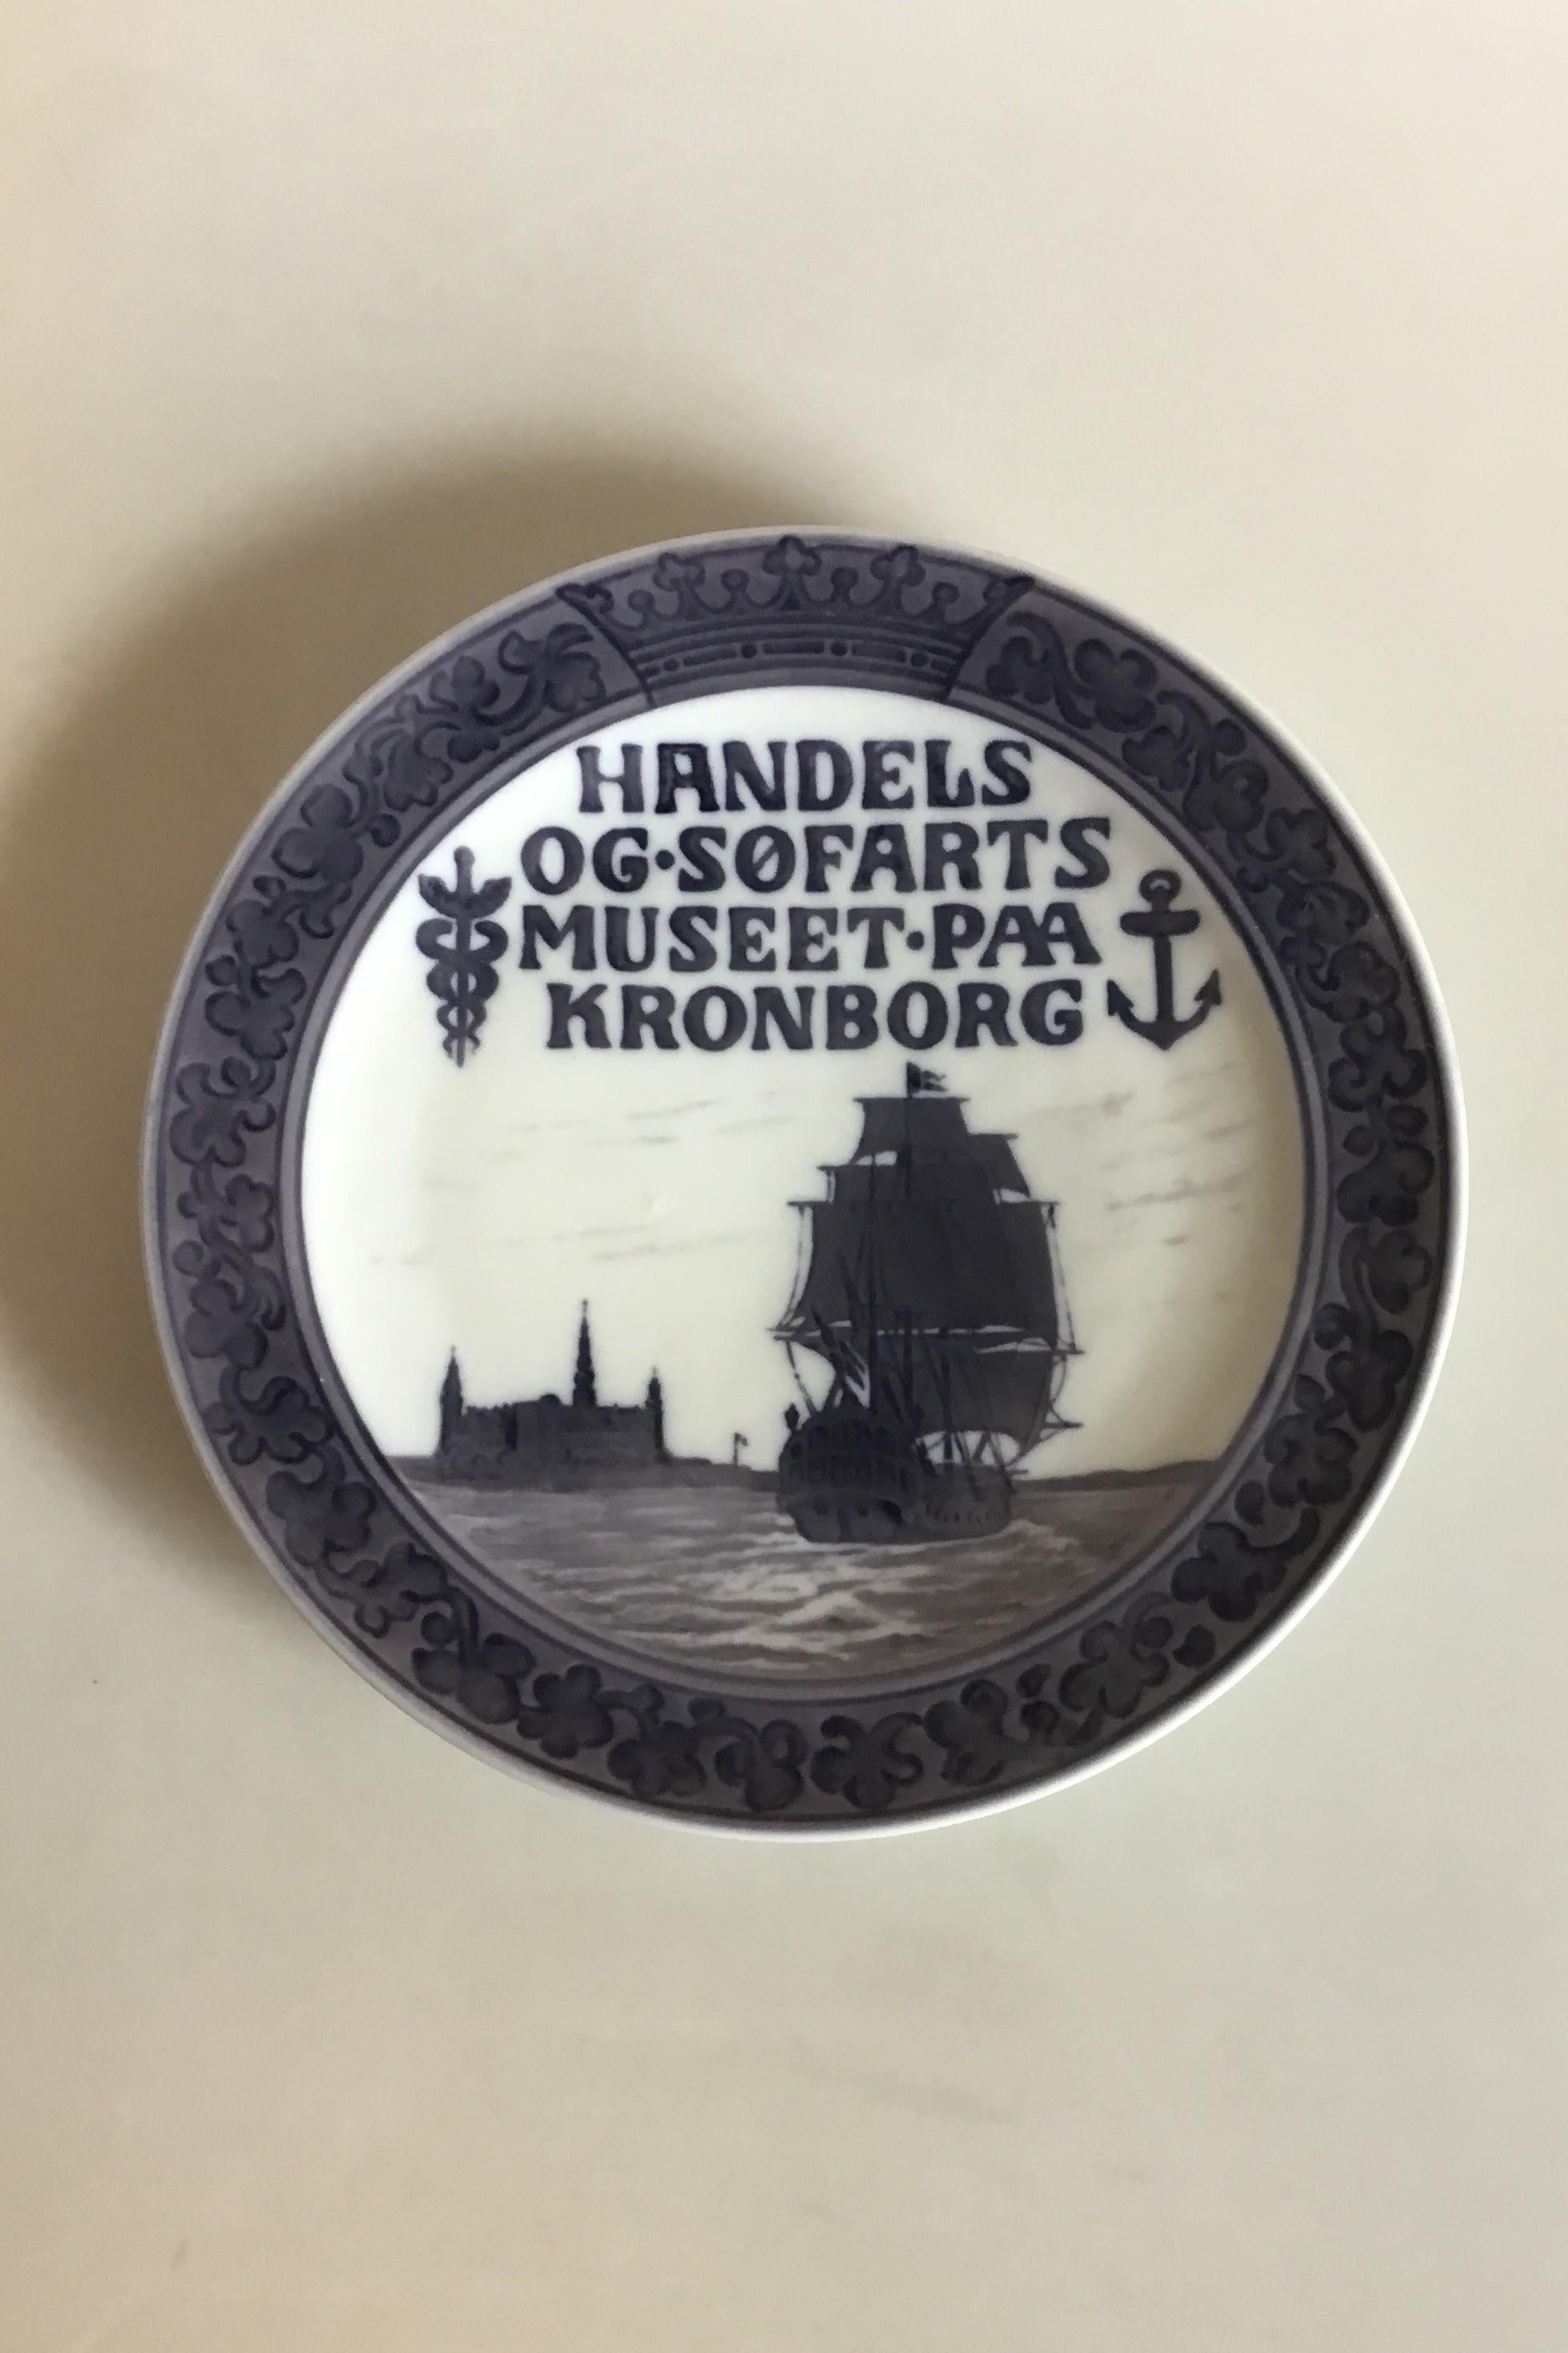 Royal Copenhagen commemorative plate from 1918 RC-CM176. Measures 22.3 cm / 8 25/32 in. and is in perfect condition.

Ellsinore castle with man-of-war in the foreground. Inscription: HANDELS OG SØFARTS MUSEET PAA KRONBORG (the mercantile navy